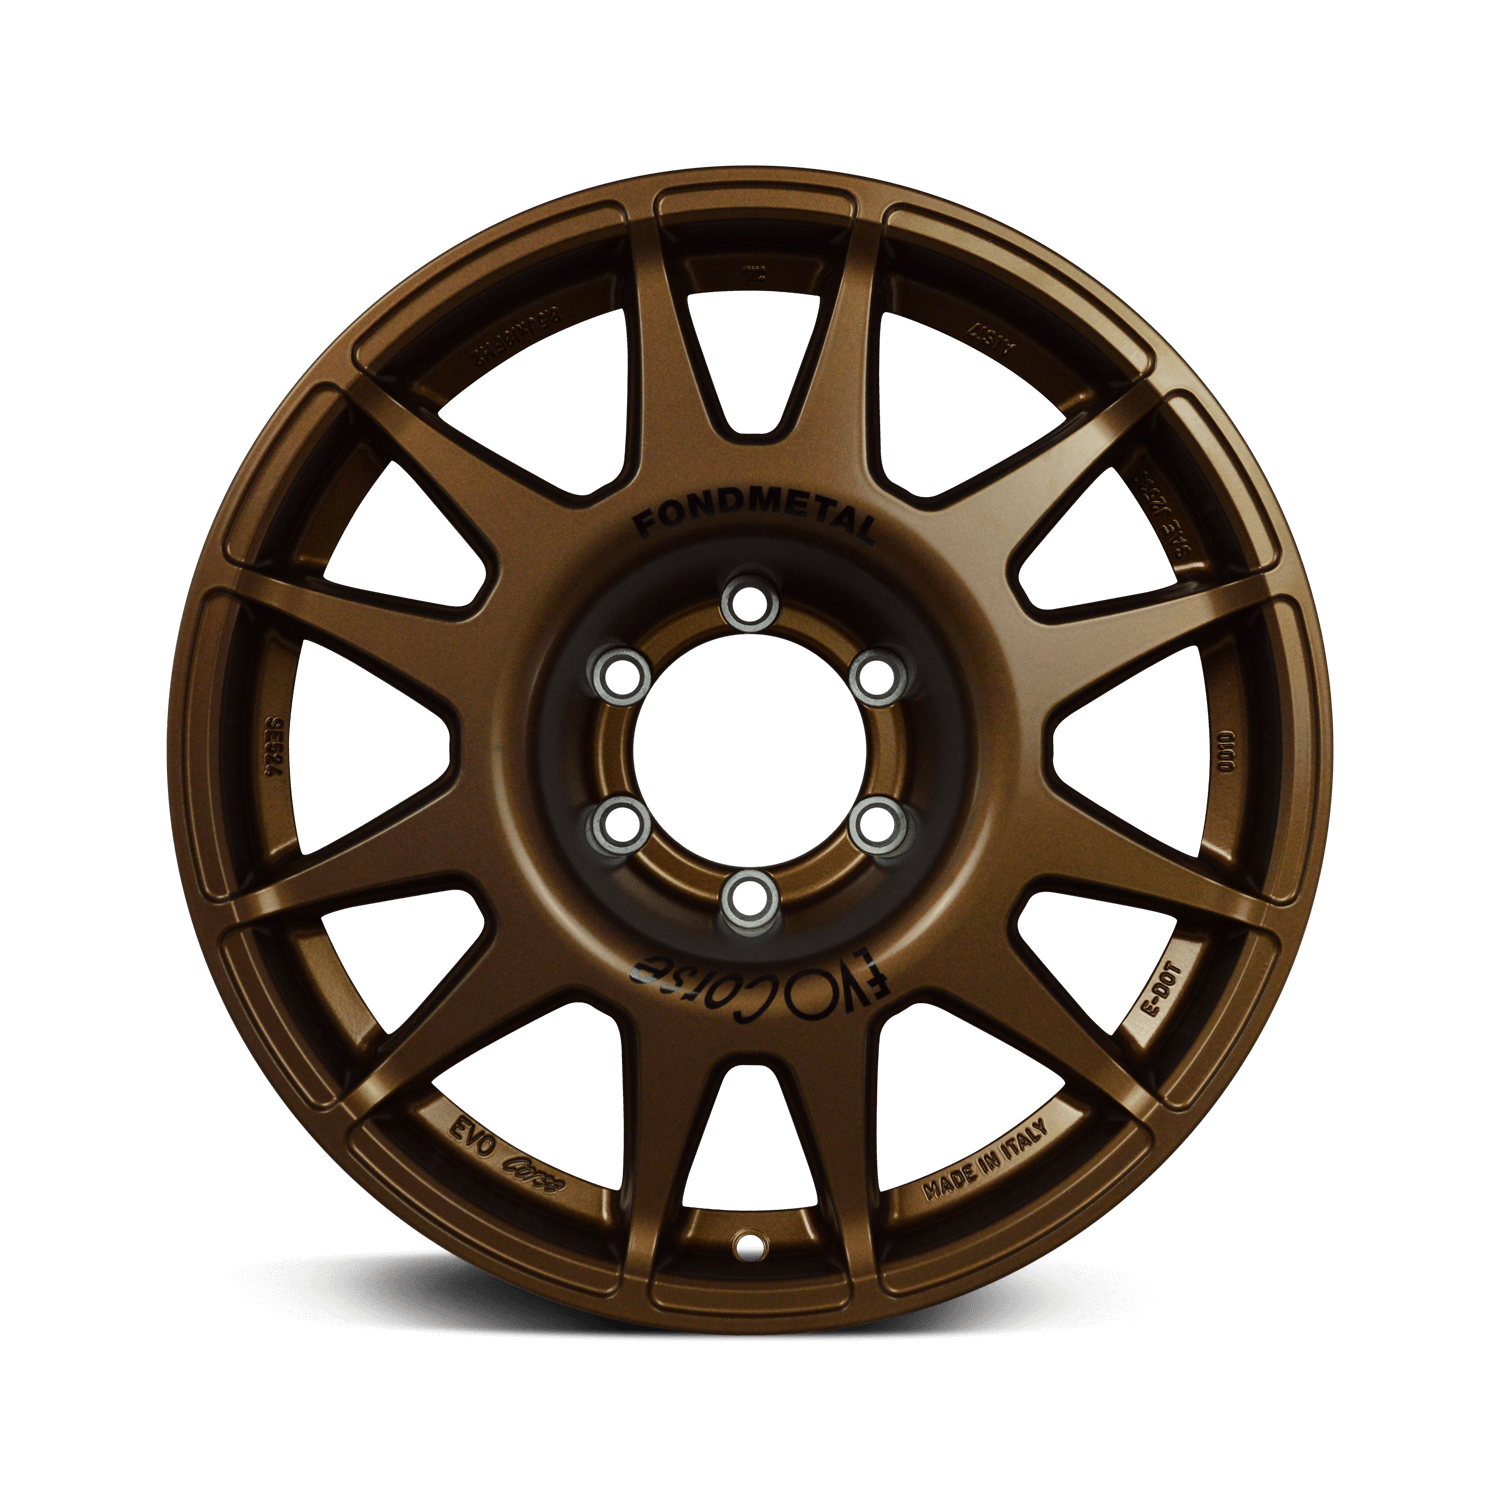 Evo Corse wheel front view matt bronze, for toyota land cruiser 300 series, anthracite. the 4x4 off road allow wheel with the highest high load rating for overlanding, rally, 4wd expedition use in australia. lc300 wheels, 300 series wheels, 300 series landcruiser wheels, what is the best offset for you land cruiser 300 wheels? This 18x8.5 ET47. Best wheel for GVM upgrade